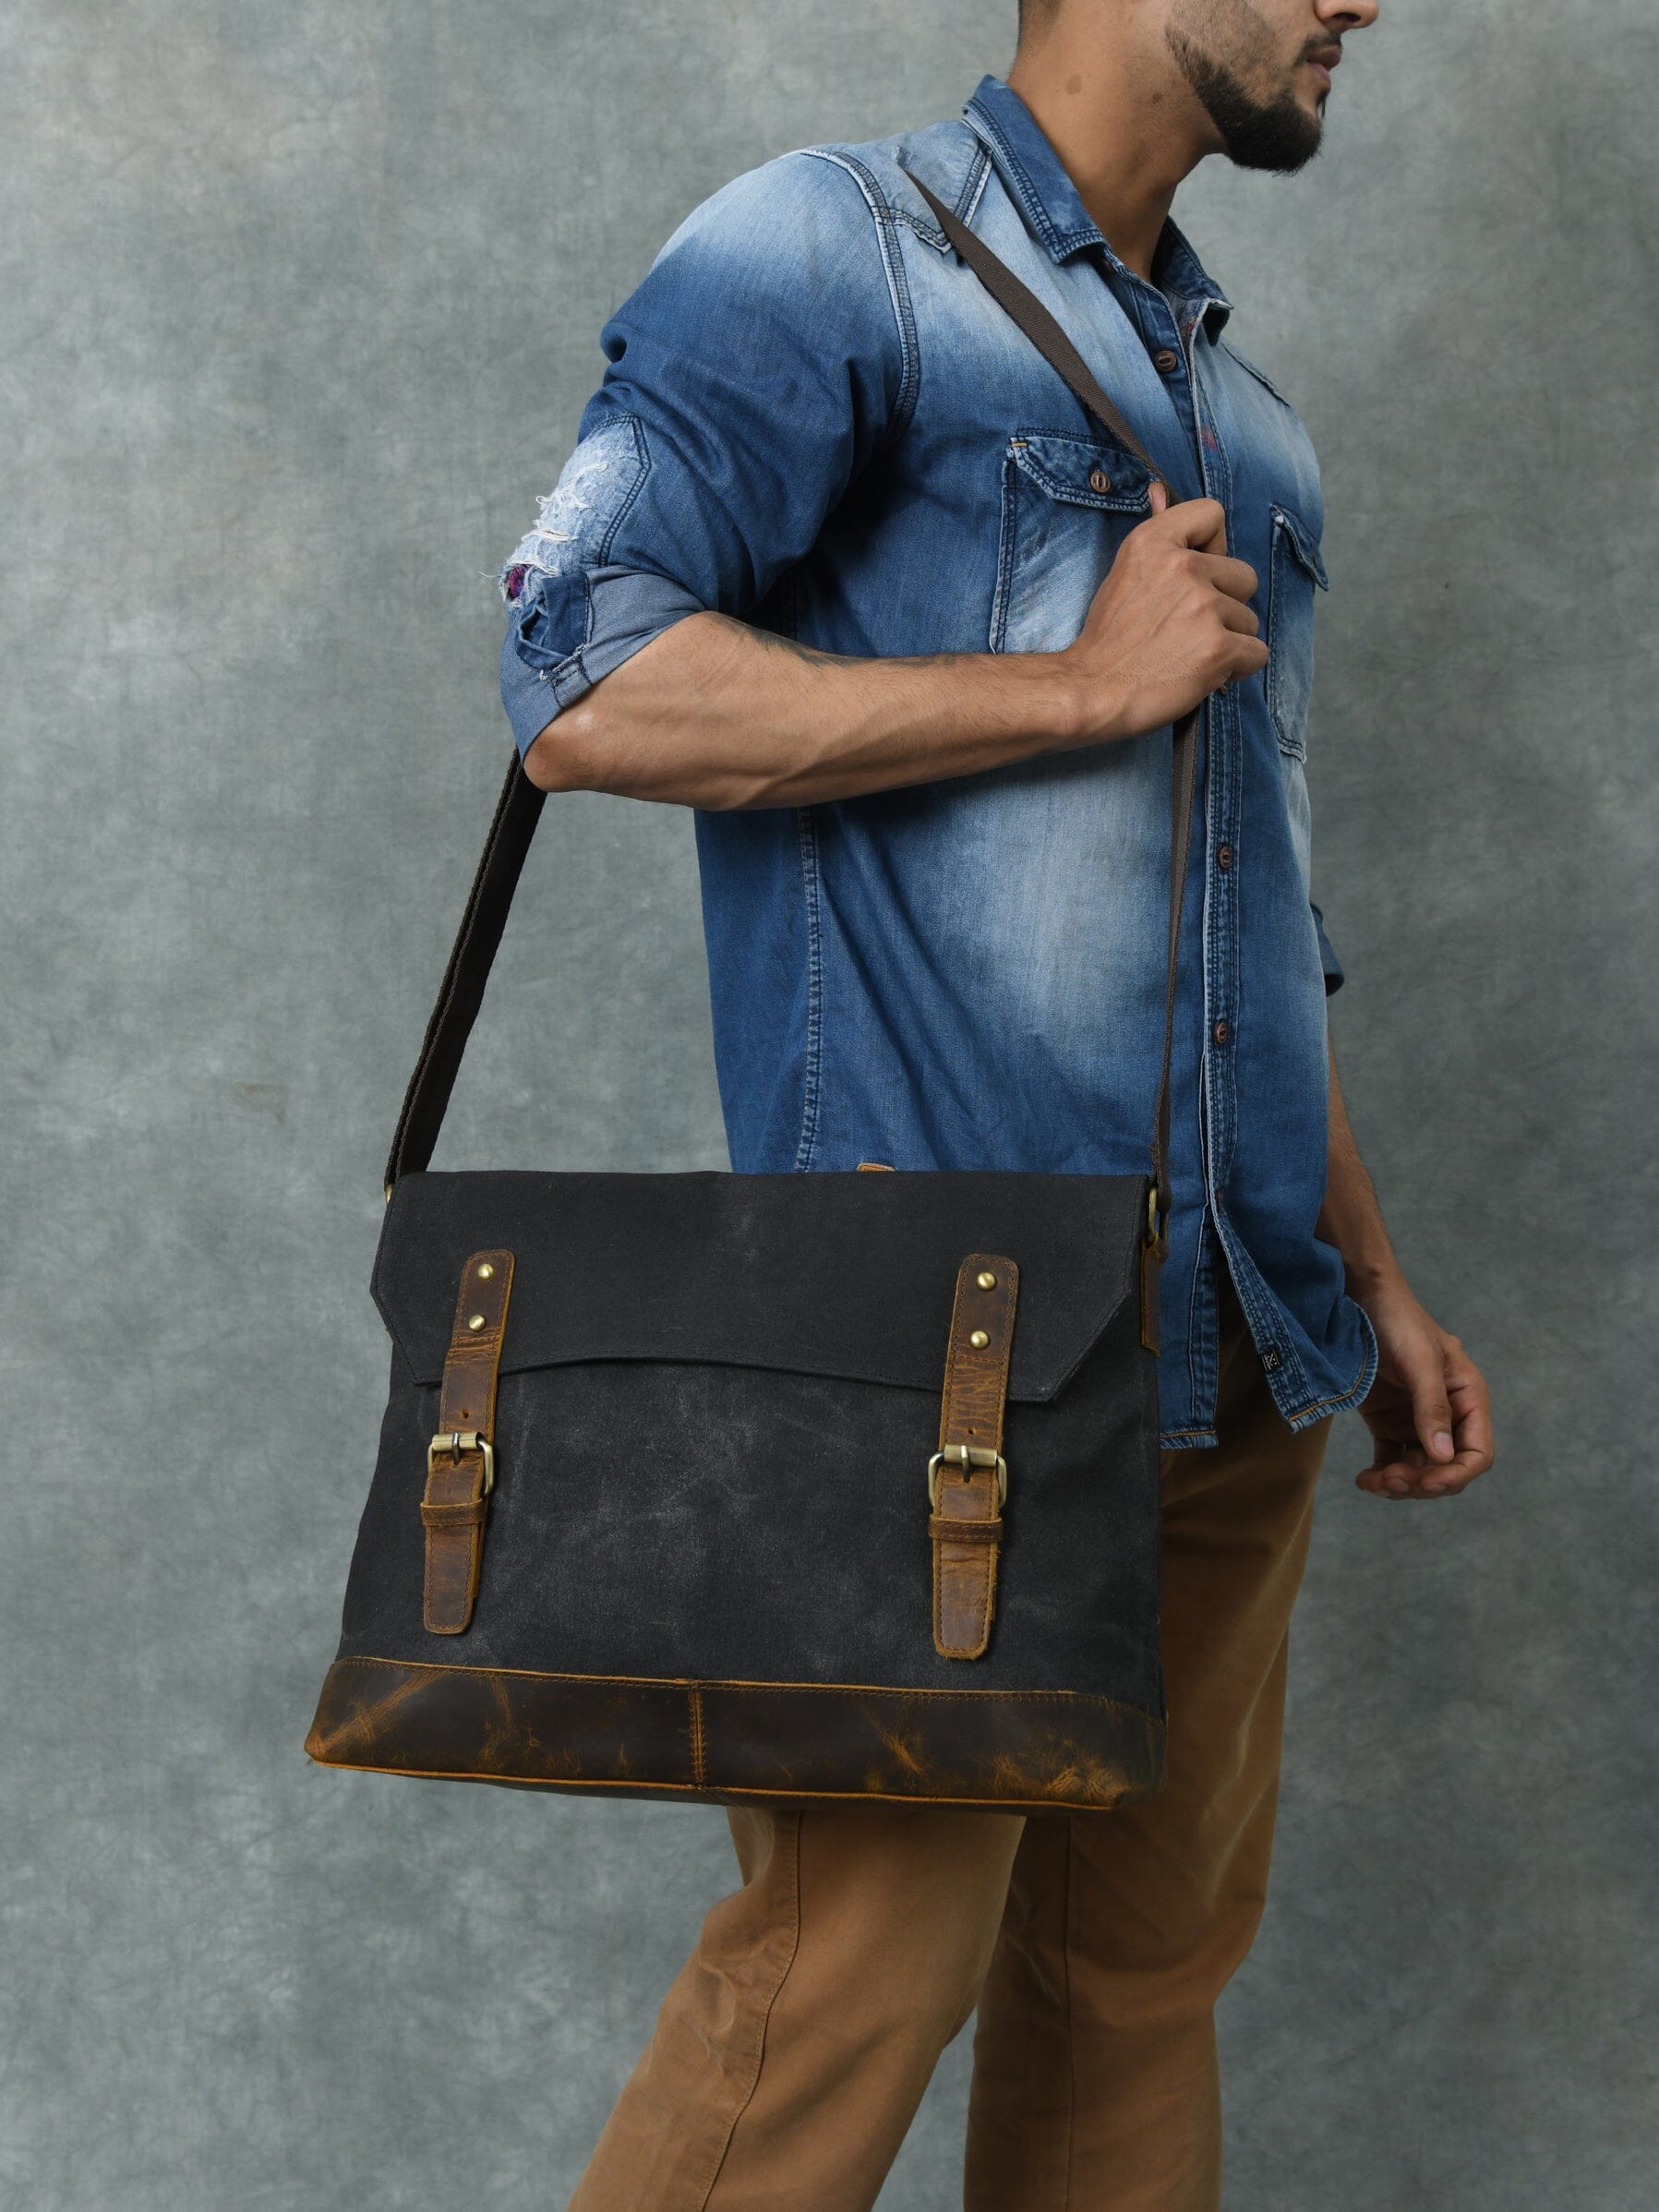 Modern Canvas Bags For The Stylish And Environmentally Conscious